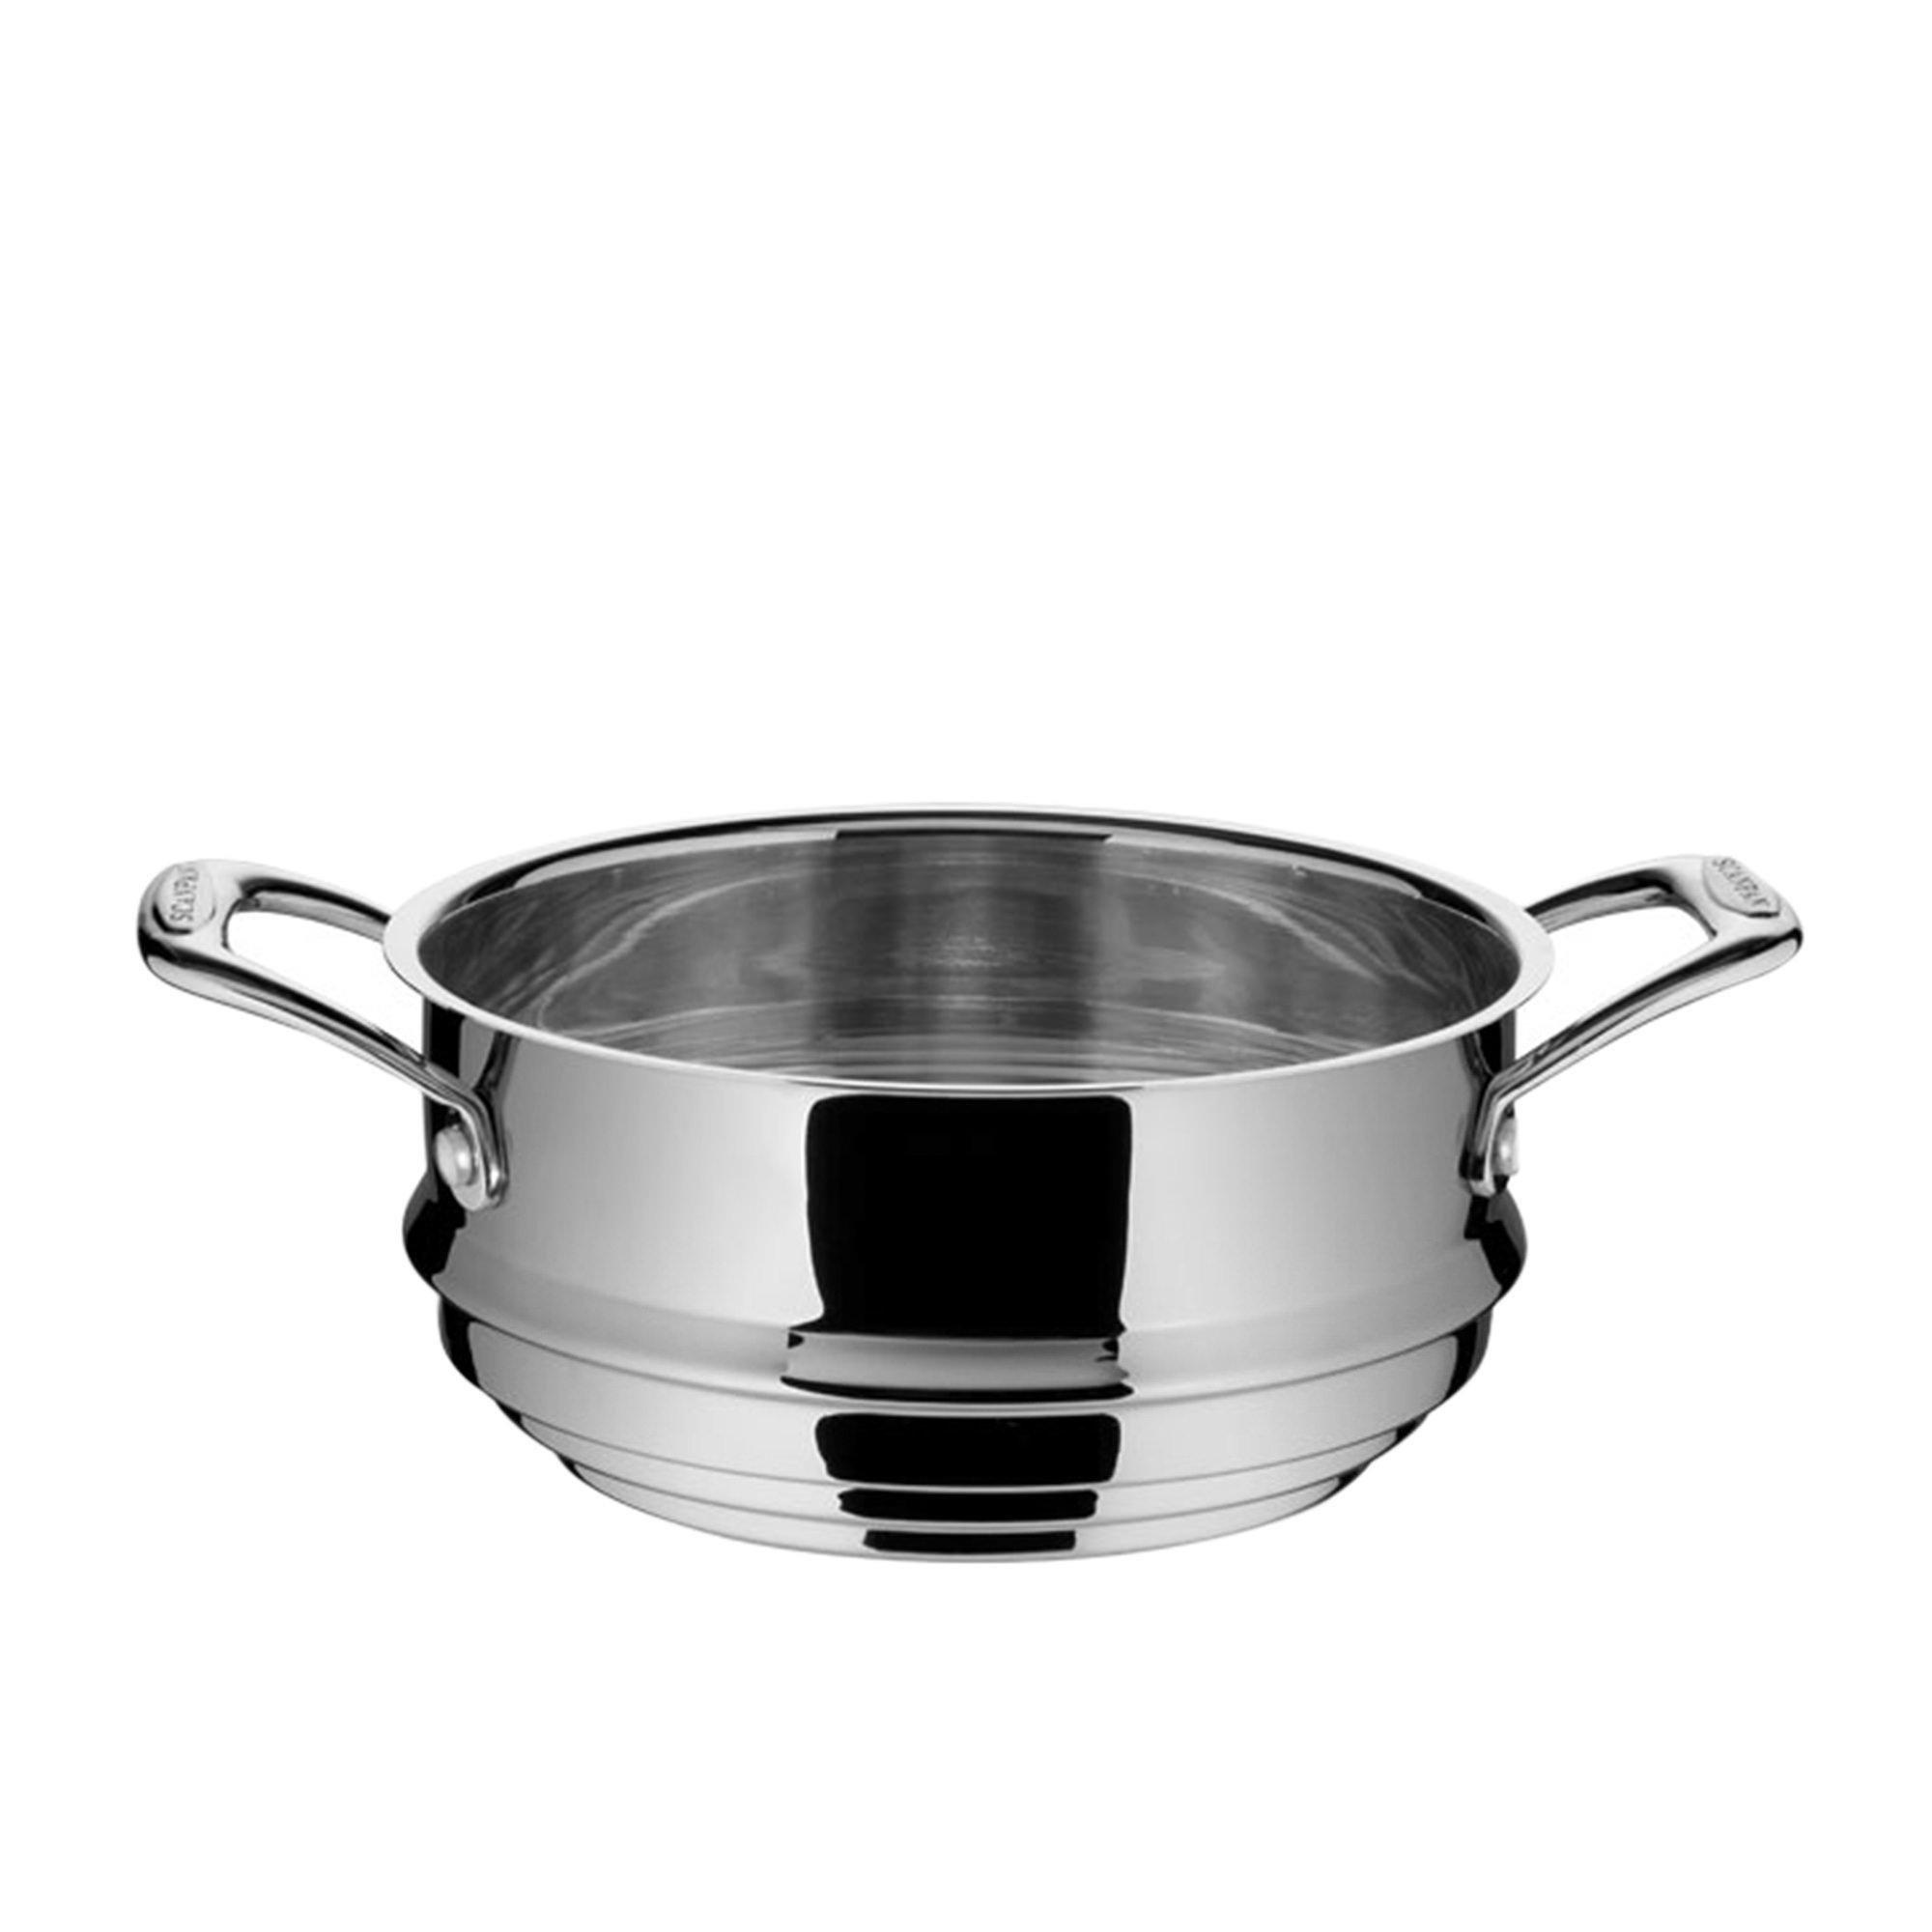 Scanpan Axis Multi Steamer Insert with Lid Image 5